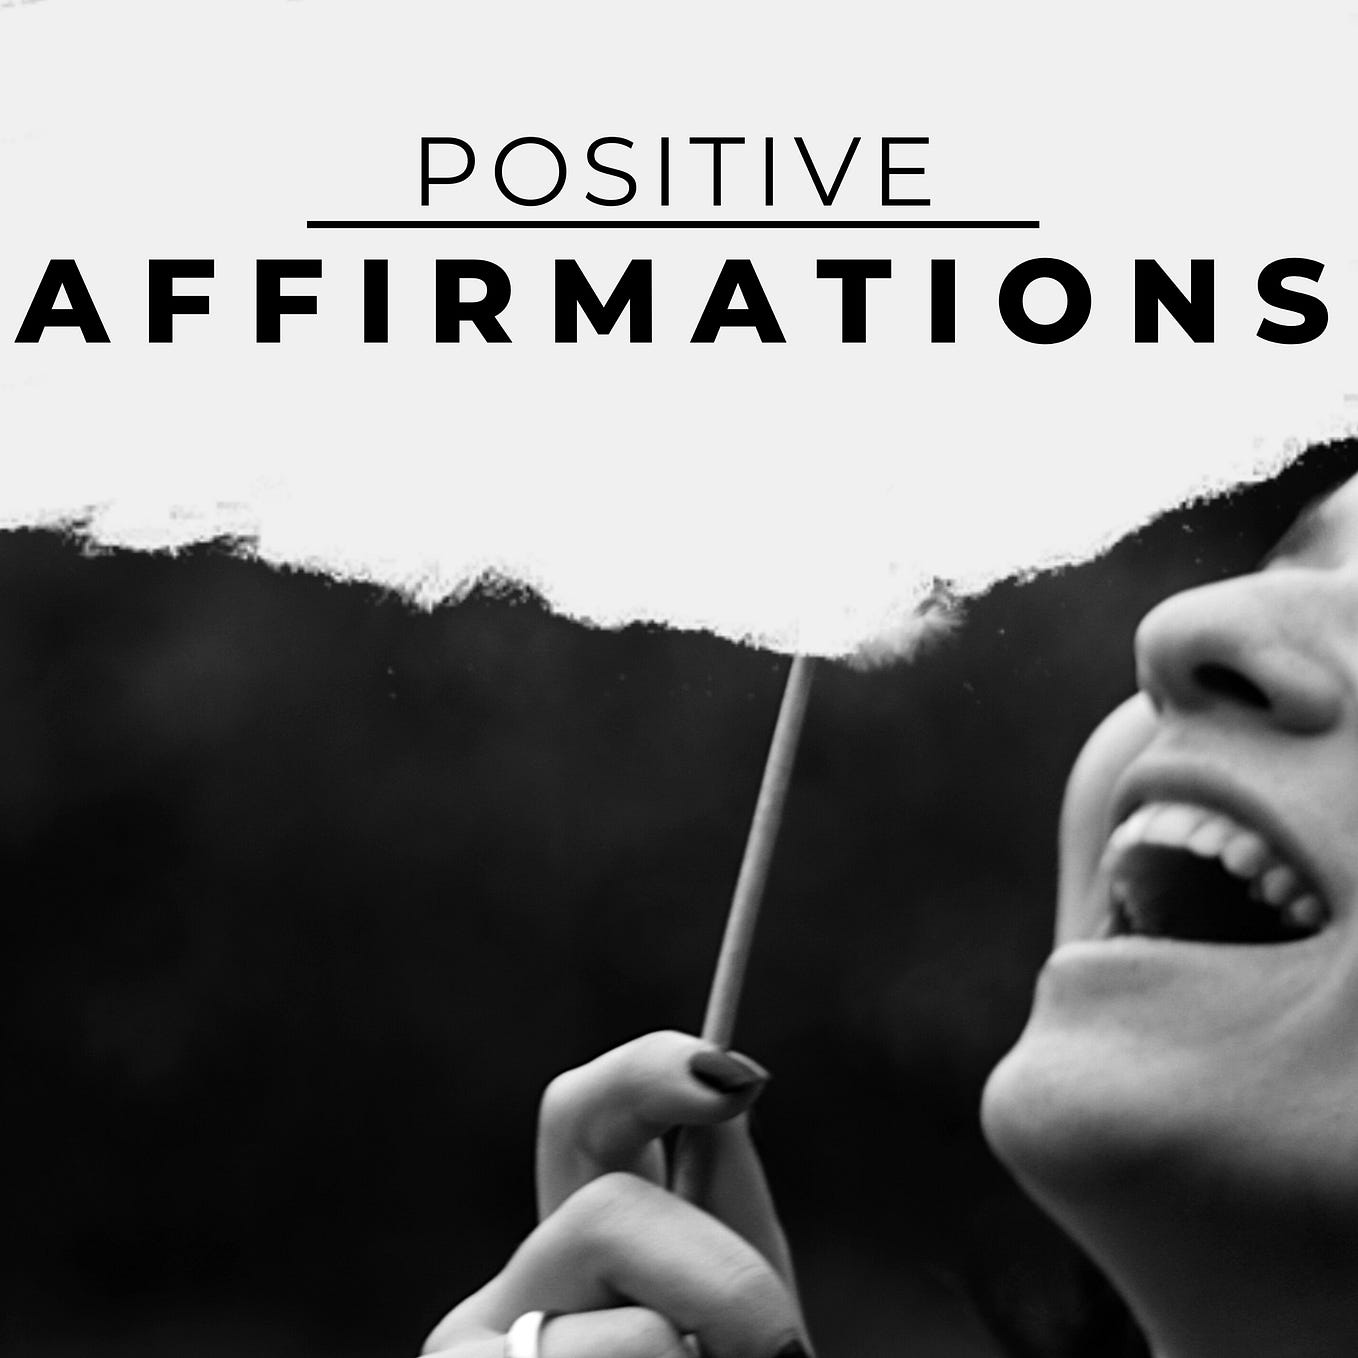 5 Positive Affirmations You Must Practice Daily!